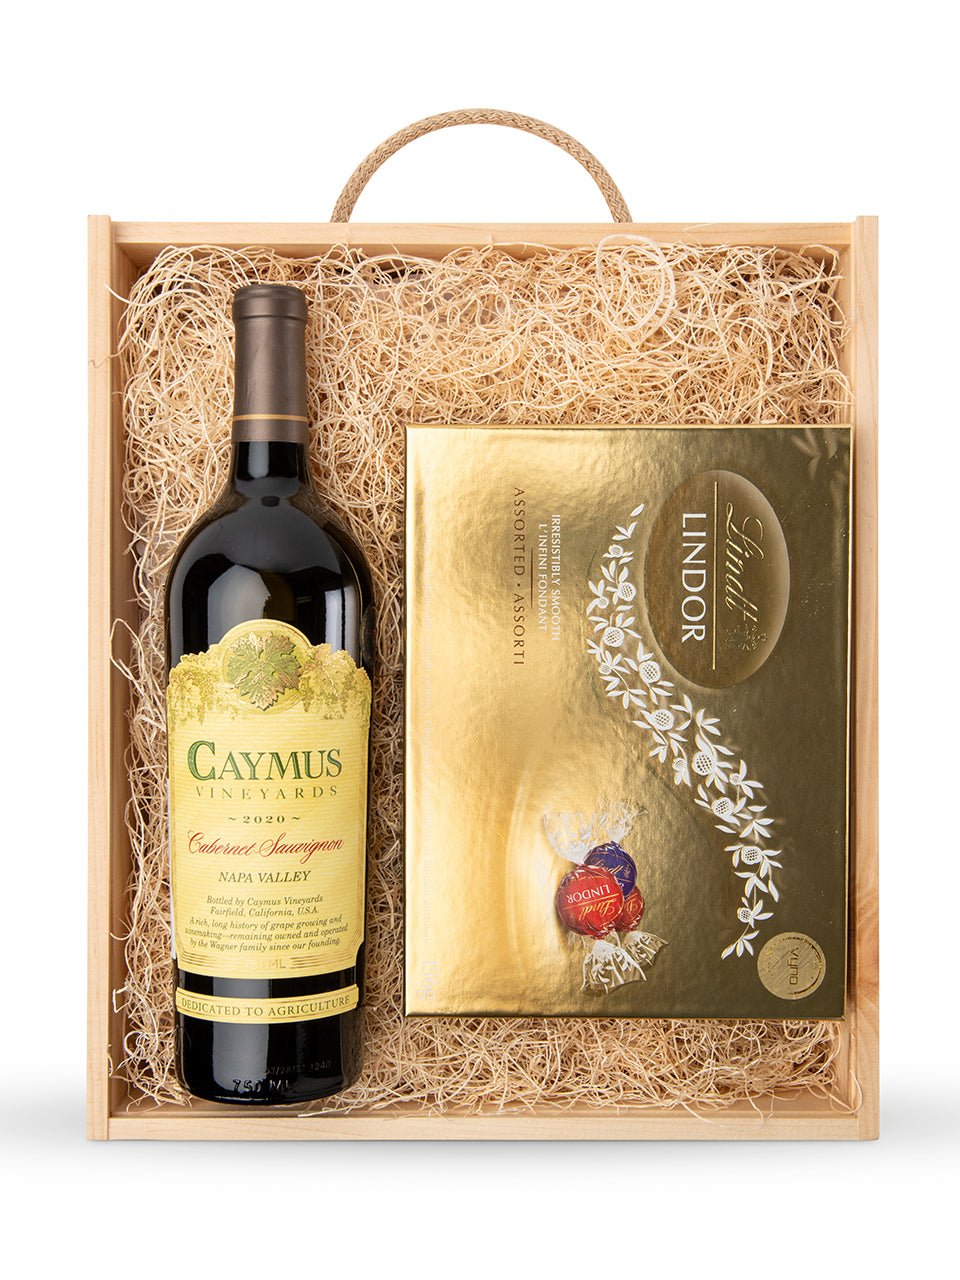 Vyno Exquisite Gift Set | Exquisite Wine & Alcohol Gift Delivery Toronto Canada | Vyno